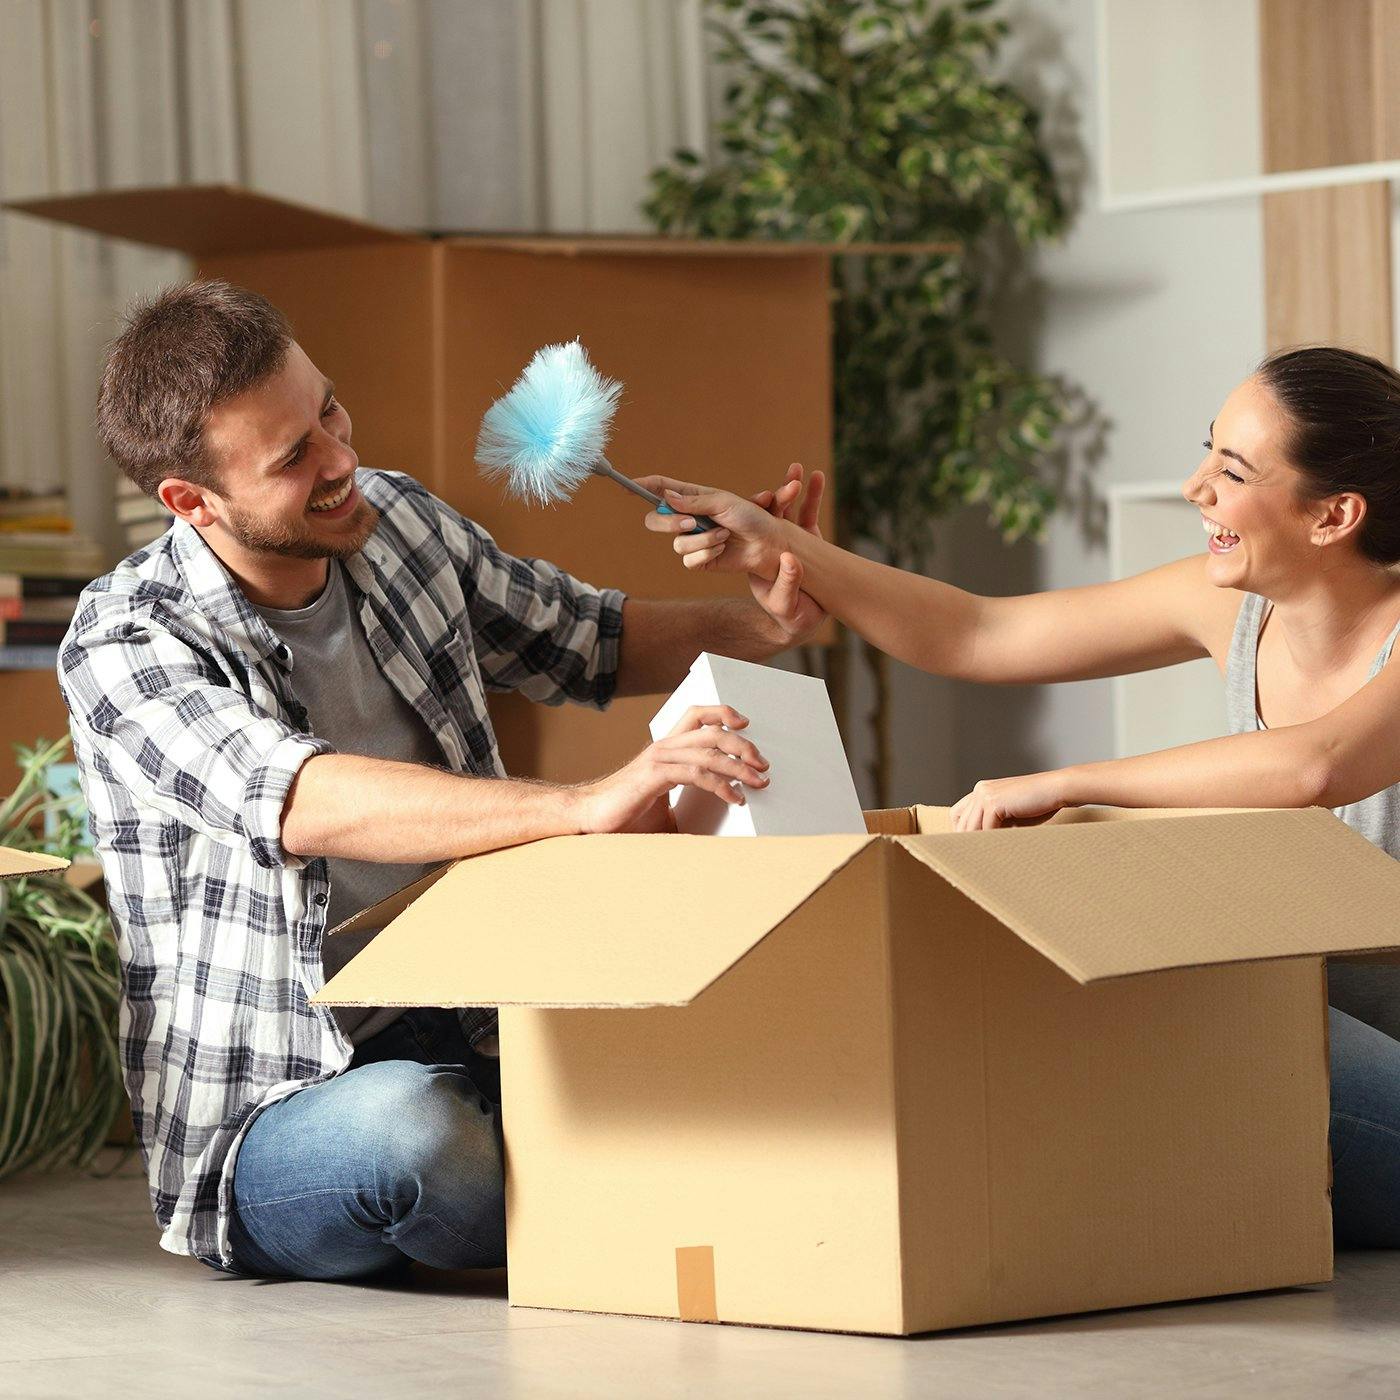 A couple unboxing belongings in a new home